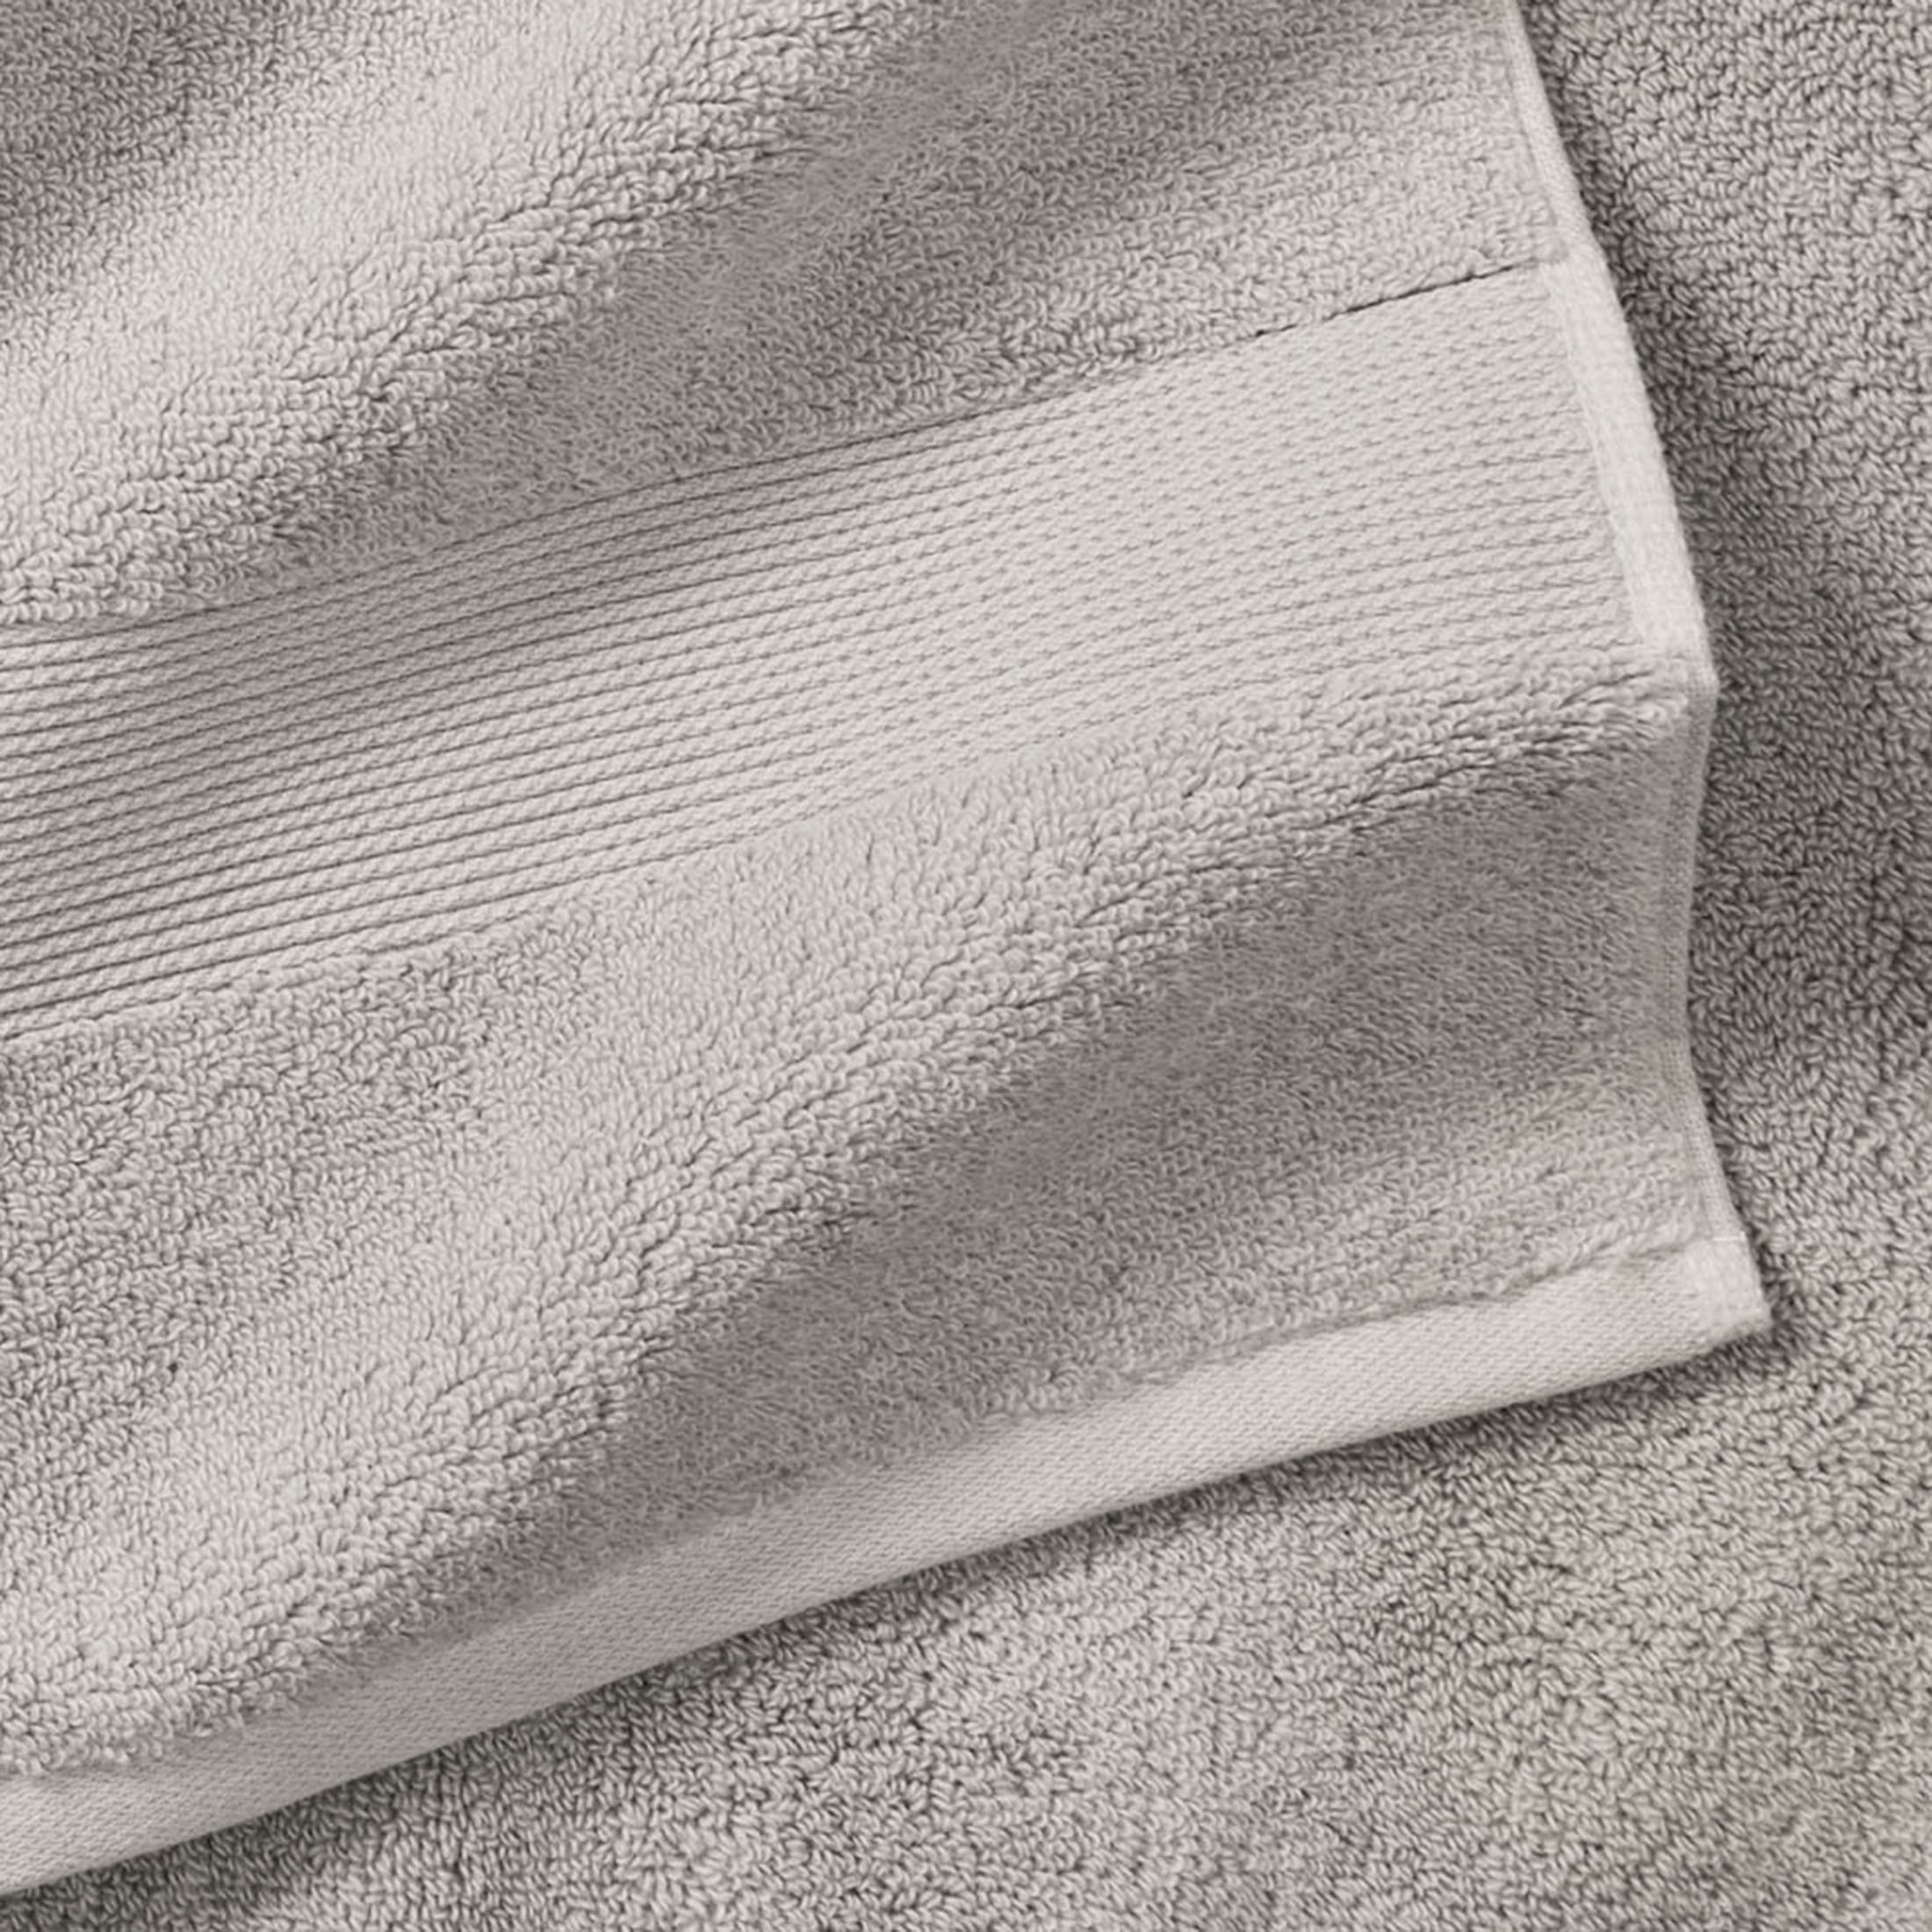 Better Homes & Gardens Signature Soft Hand Towel, Soft Silver - image 3 of 6